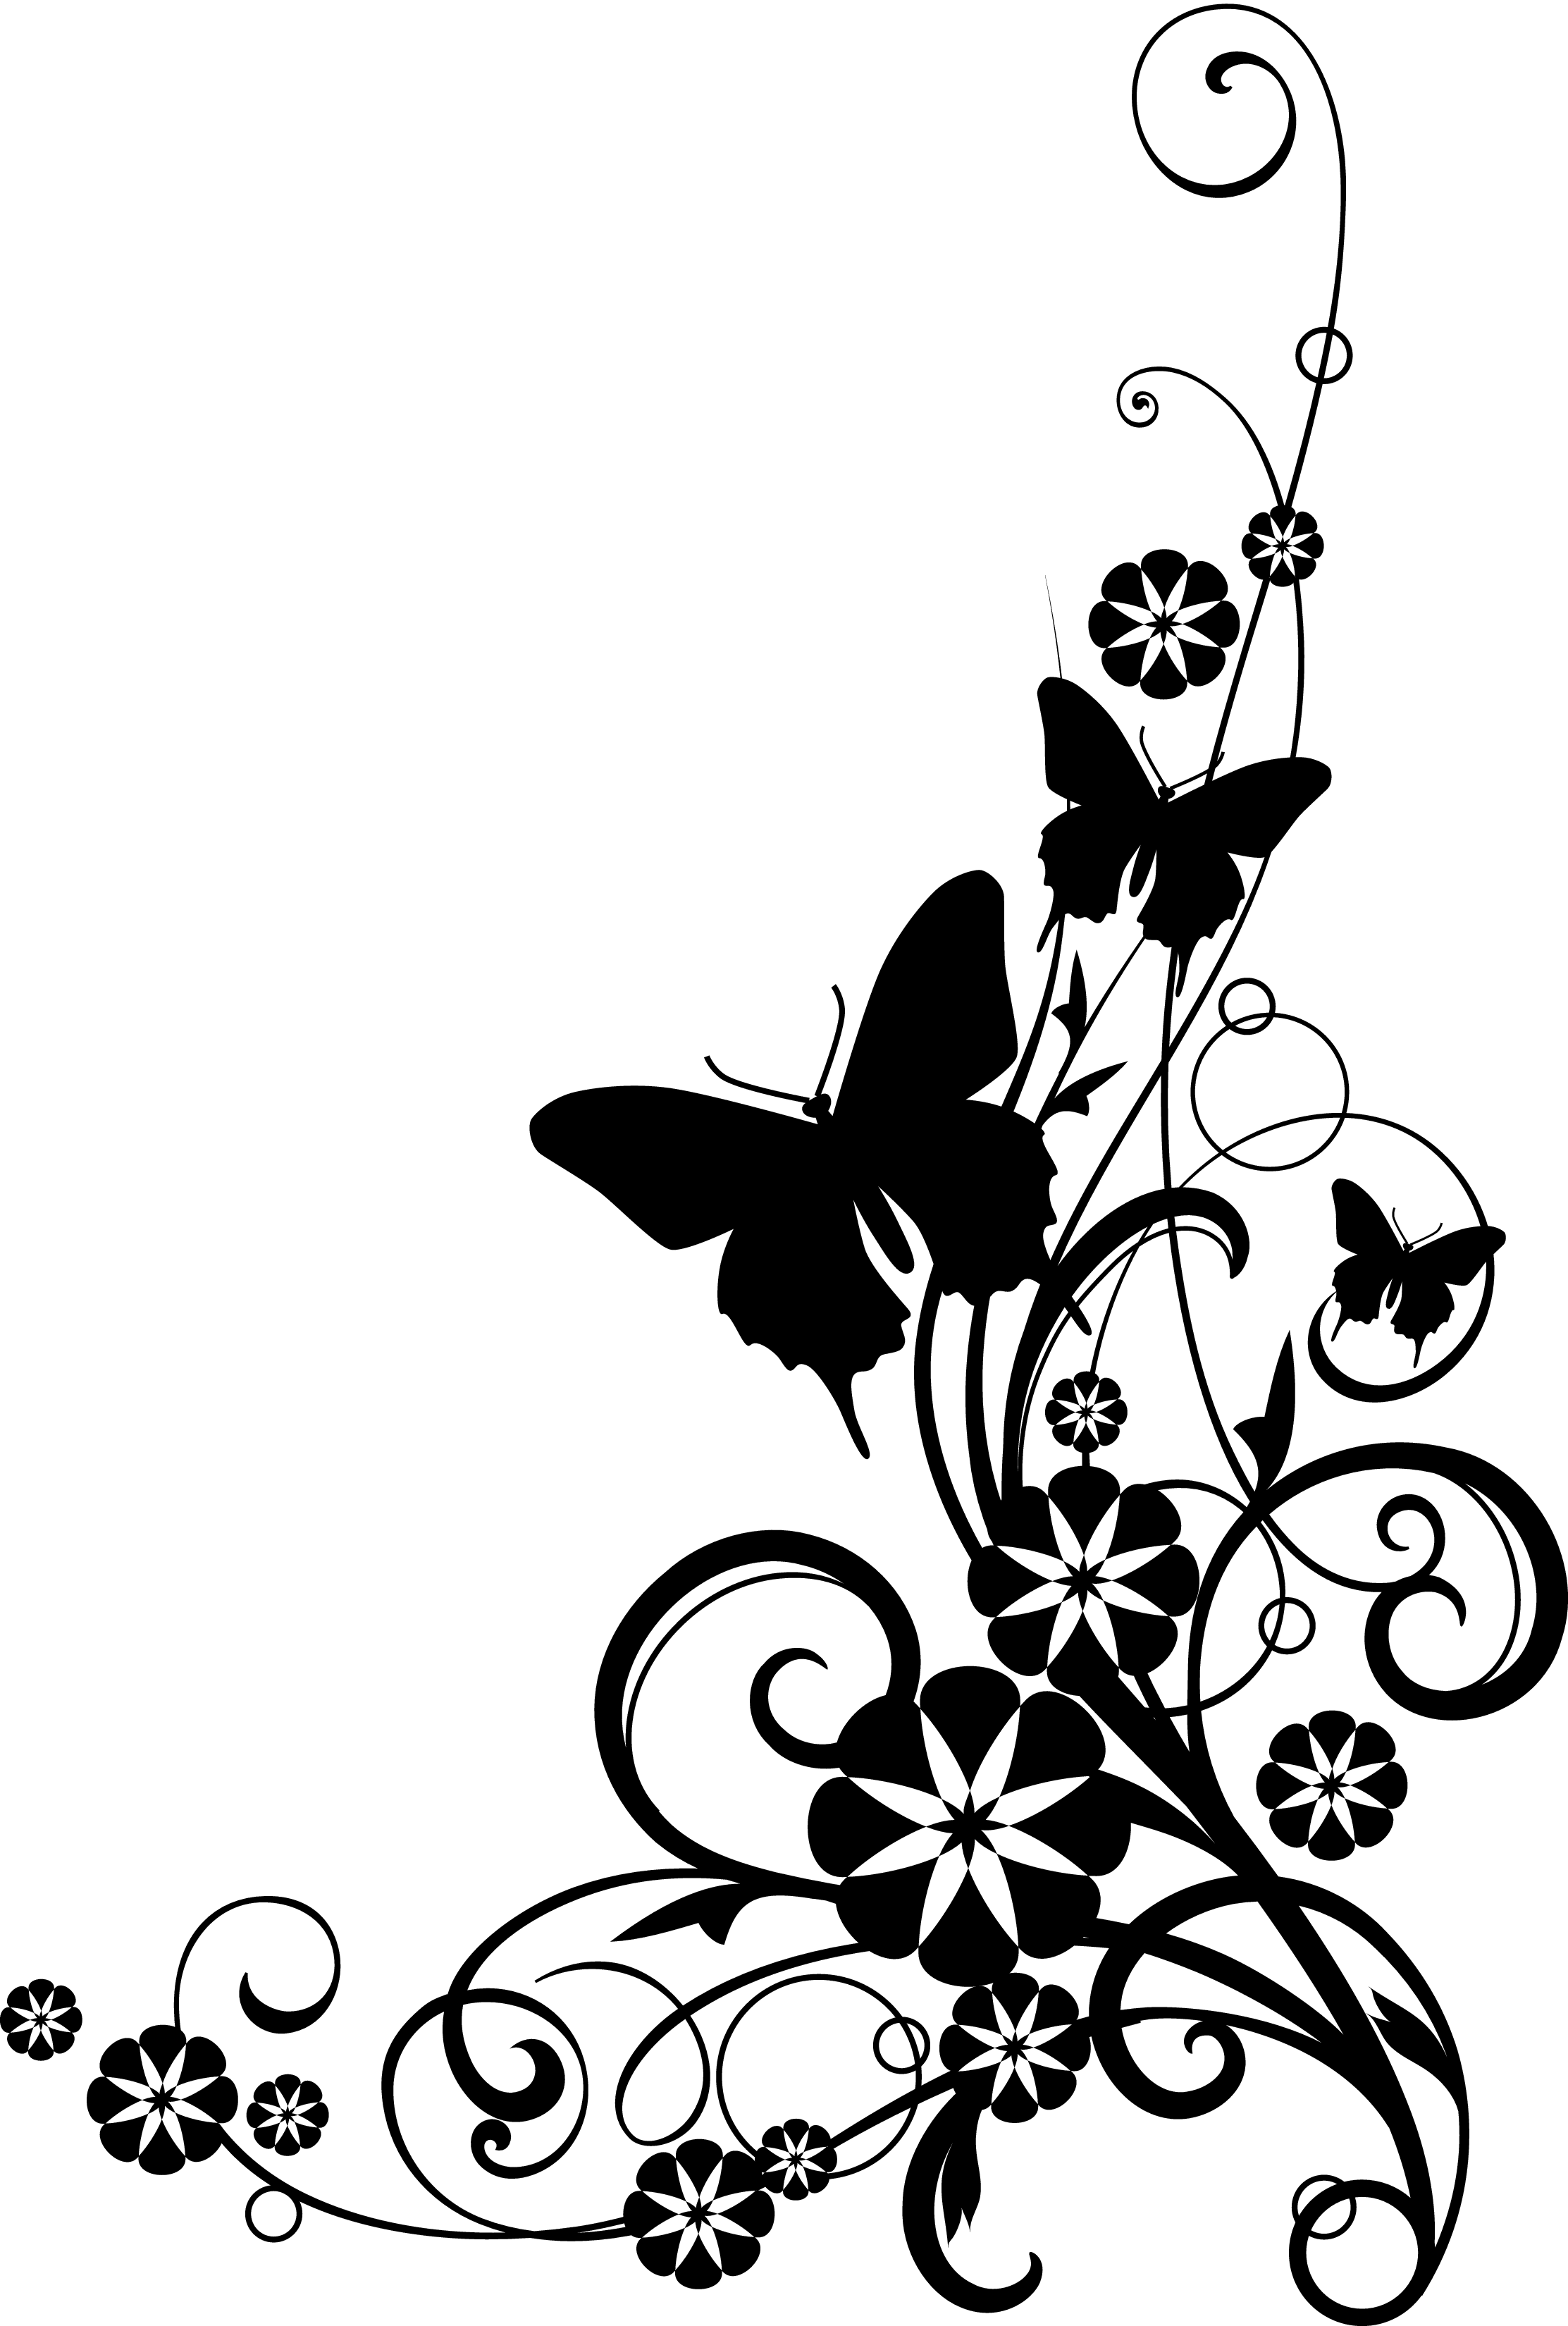 Flower Border Black And White Clip Art Hd Images 3 HD Wallpapers ...